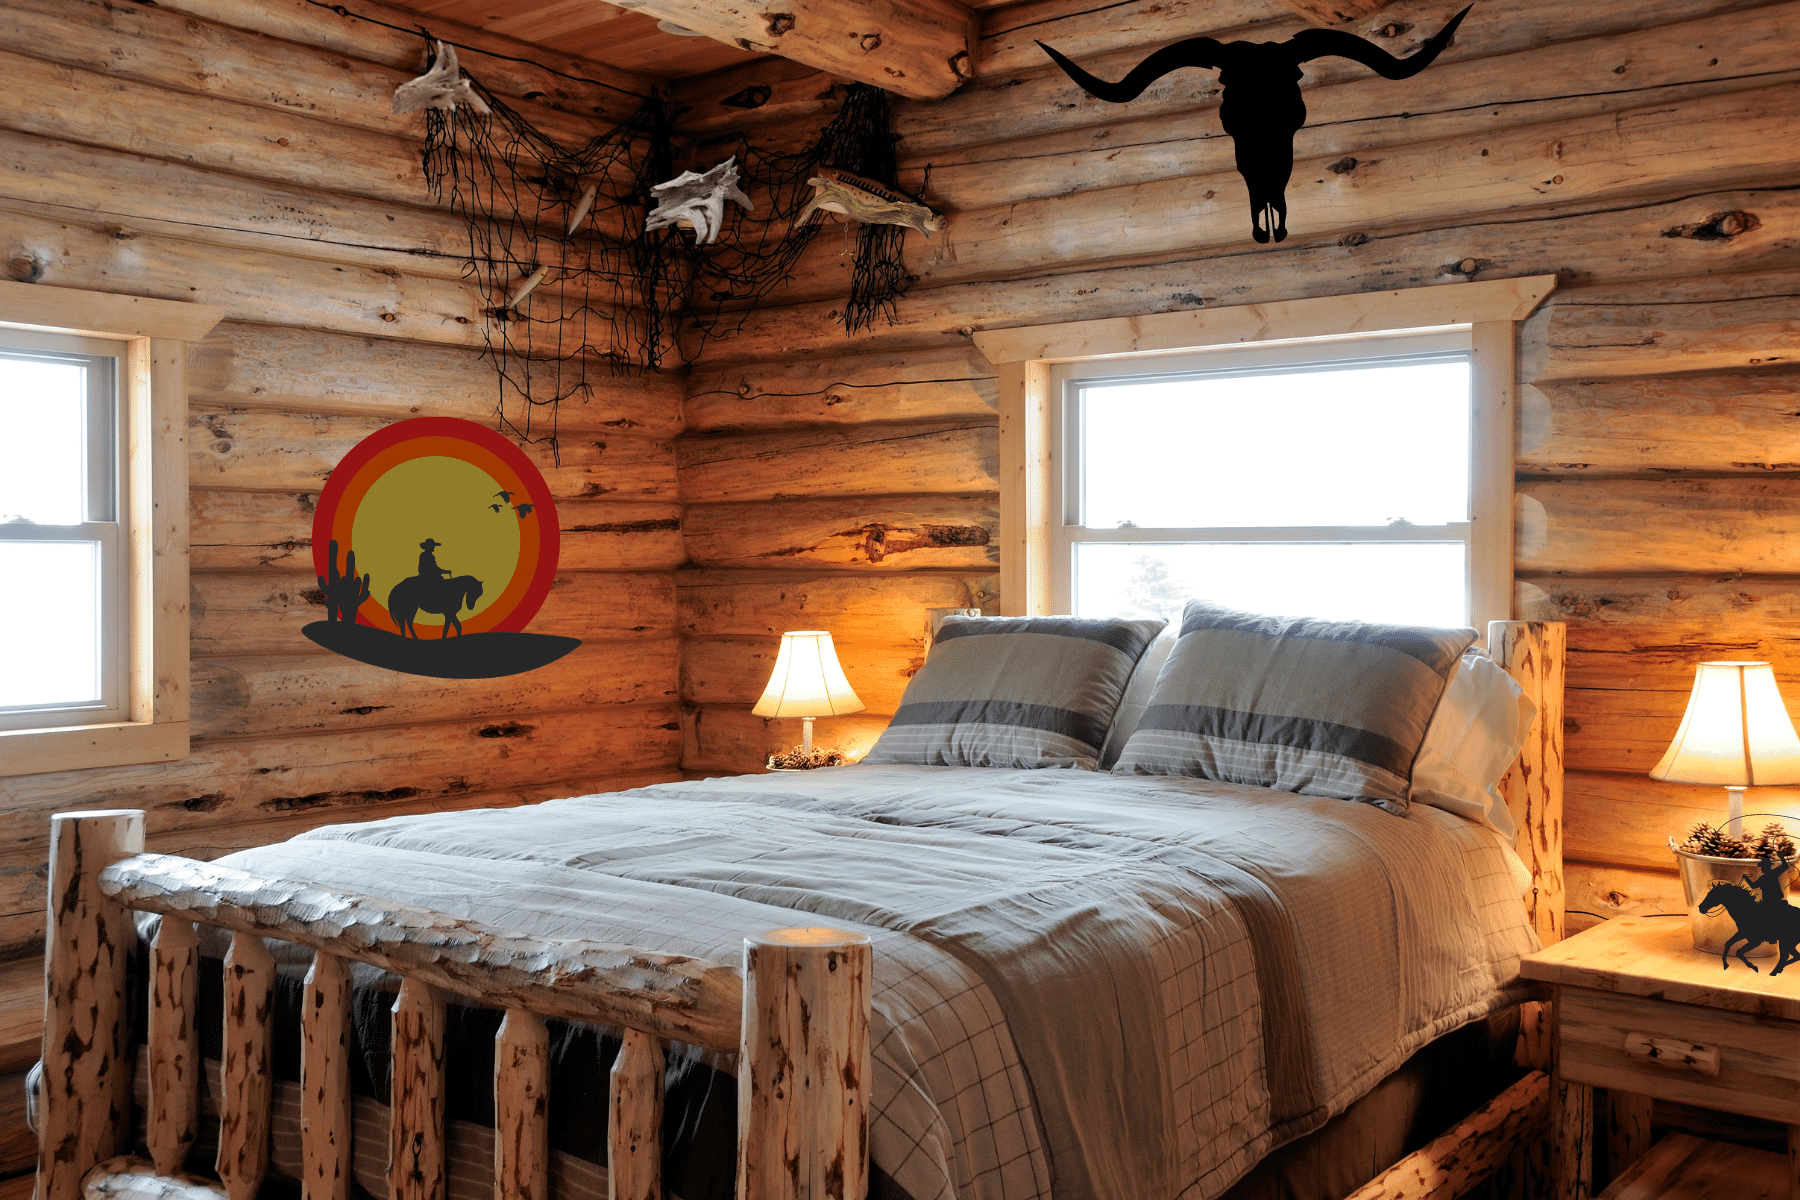 western bedroom furniture rustic style decor ideas with driftwood